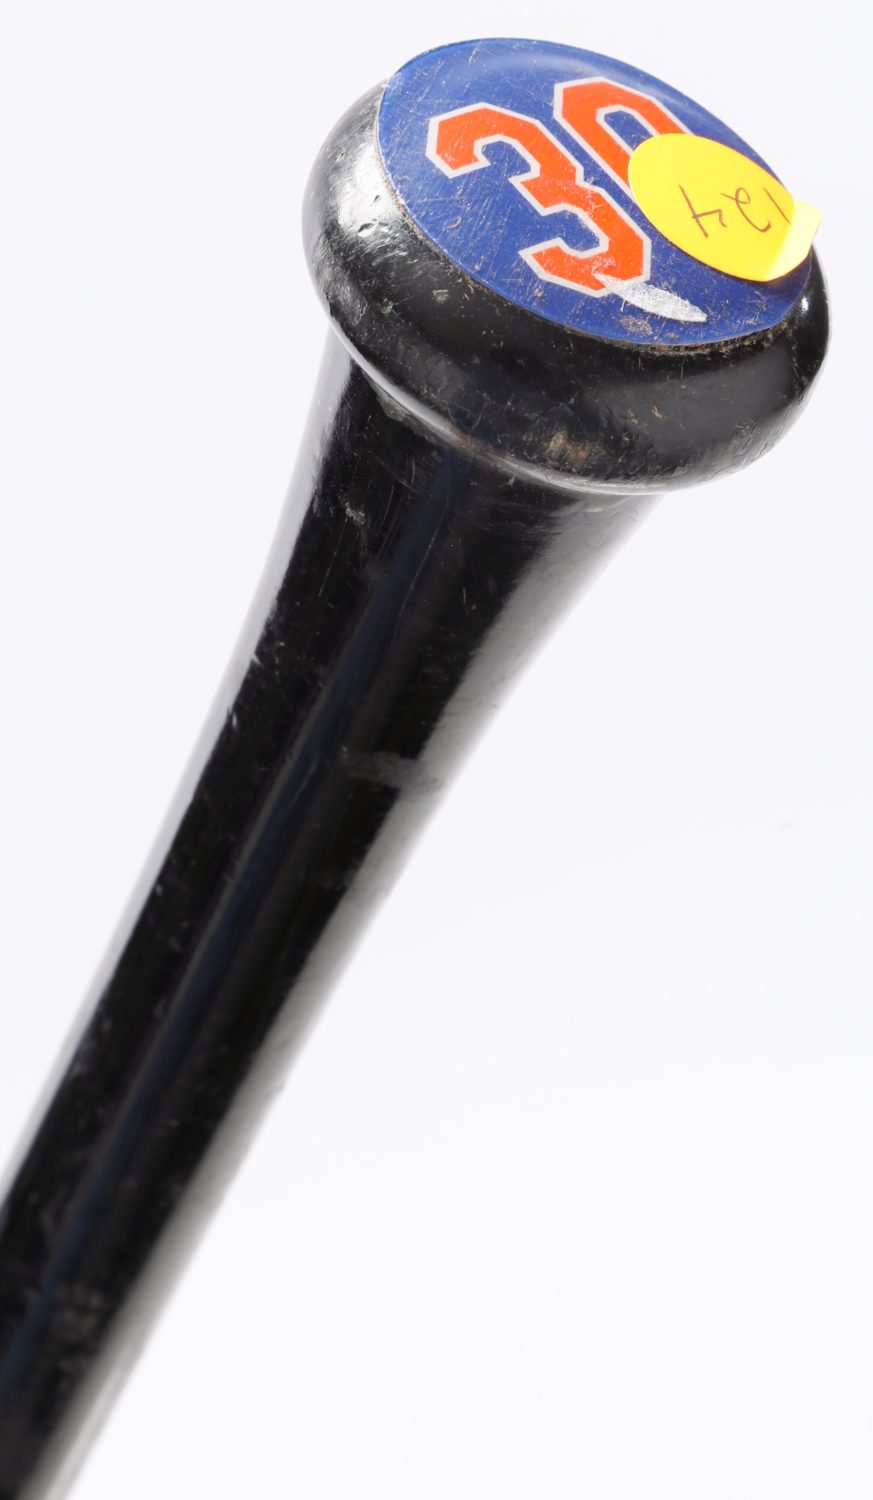 Conforto's Bat from Game 5 of 2015 World Series